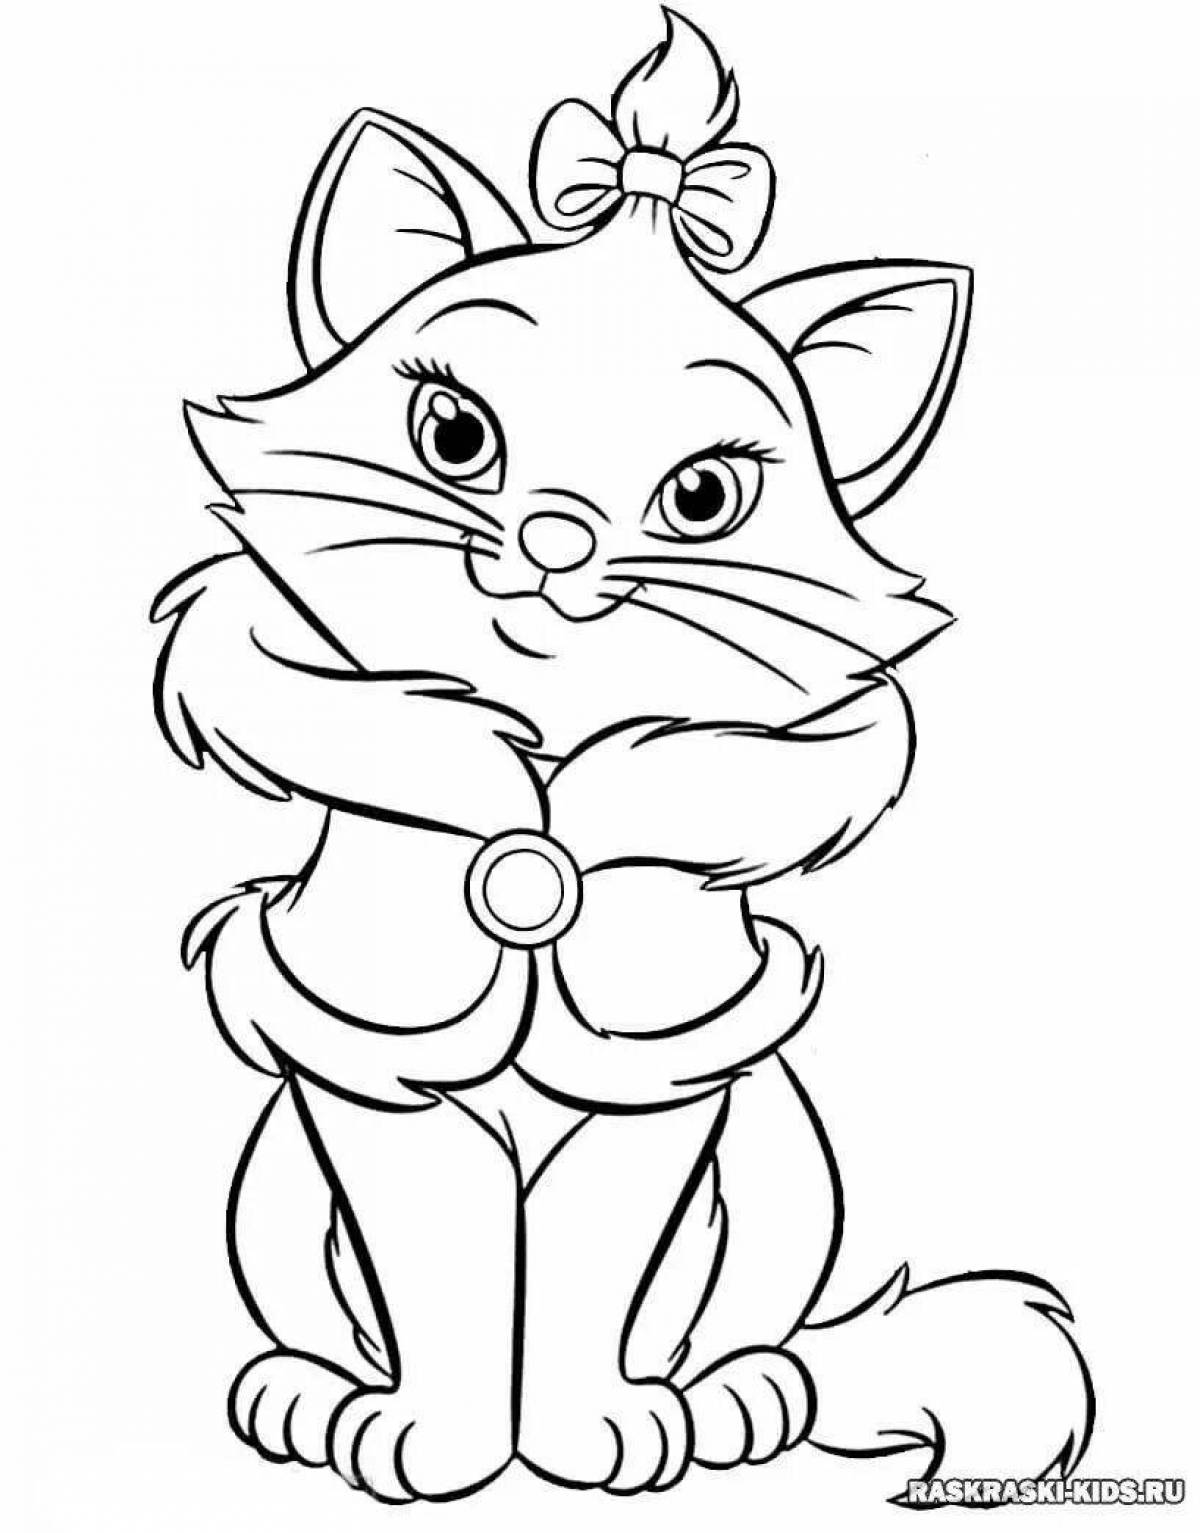 Crazy coloring book for 5-6 year olds with cats